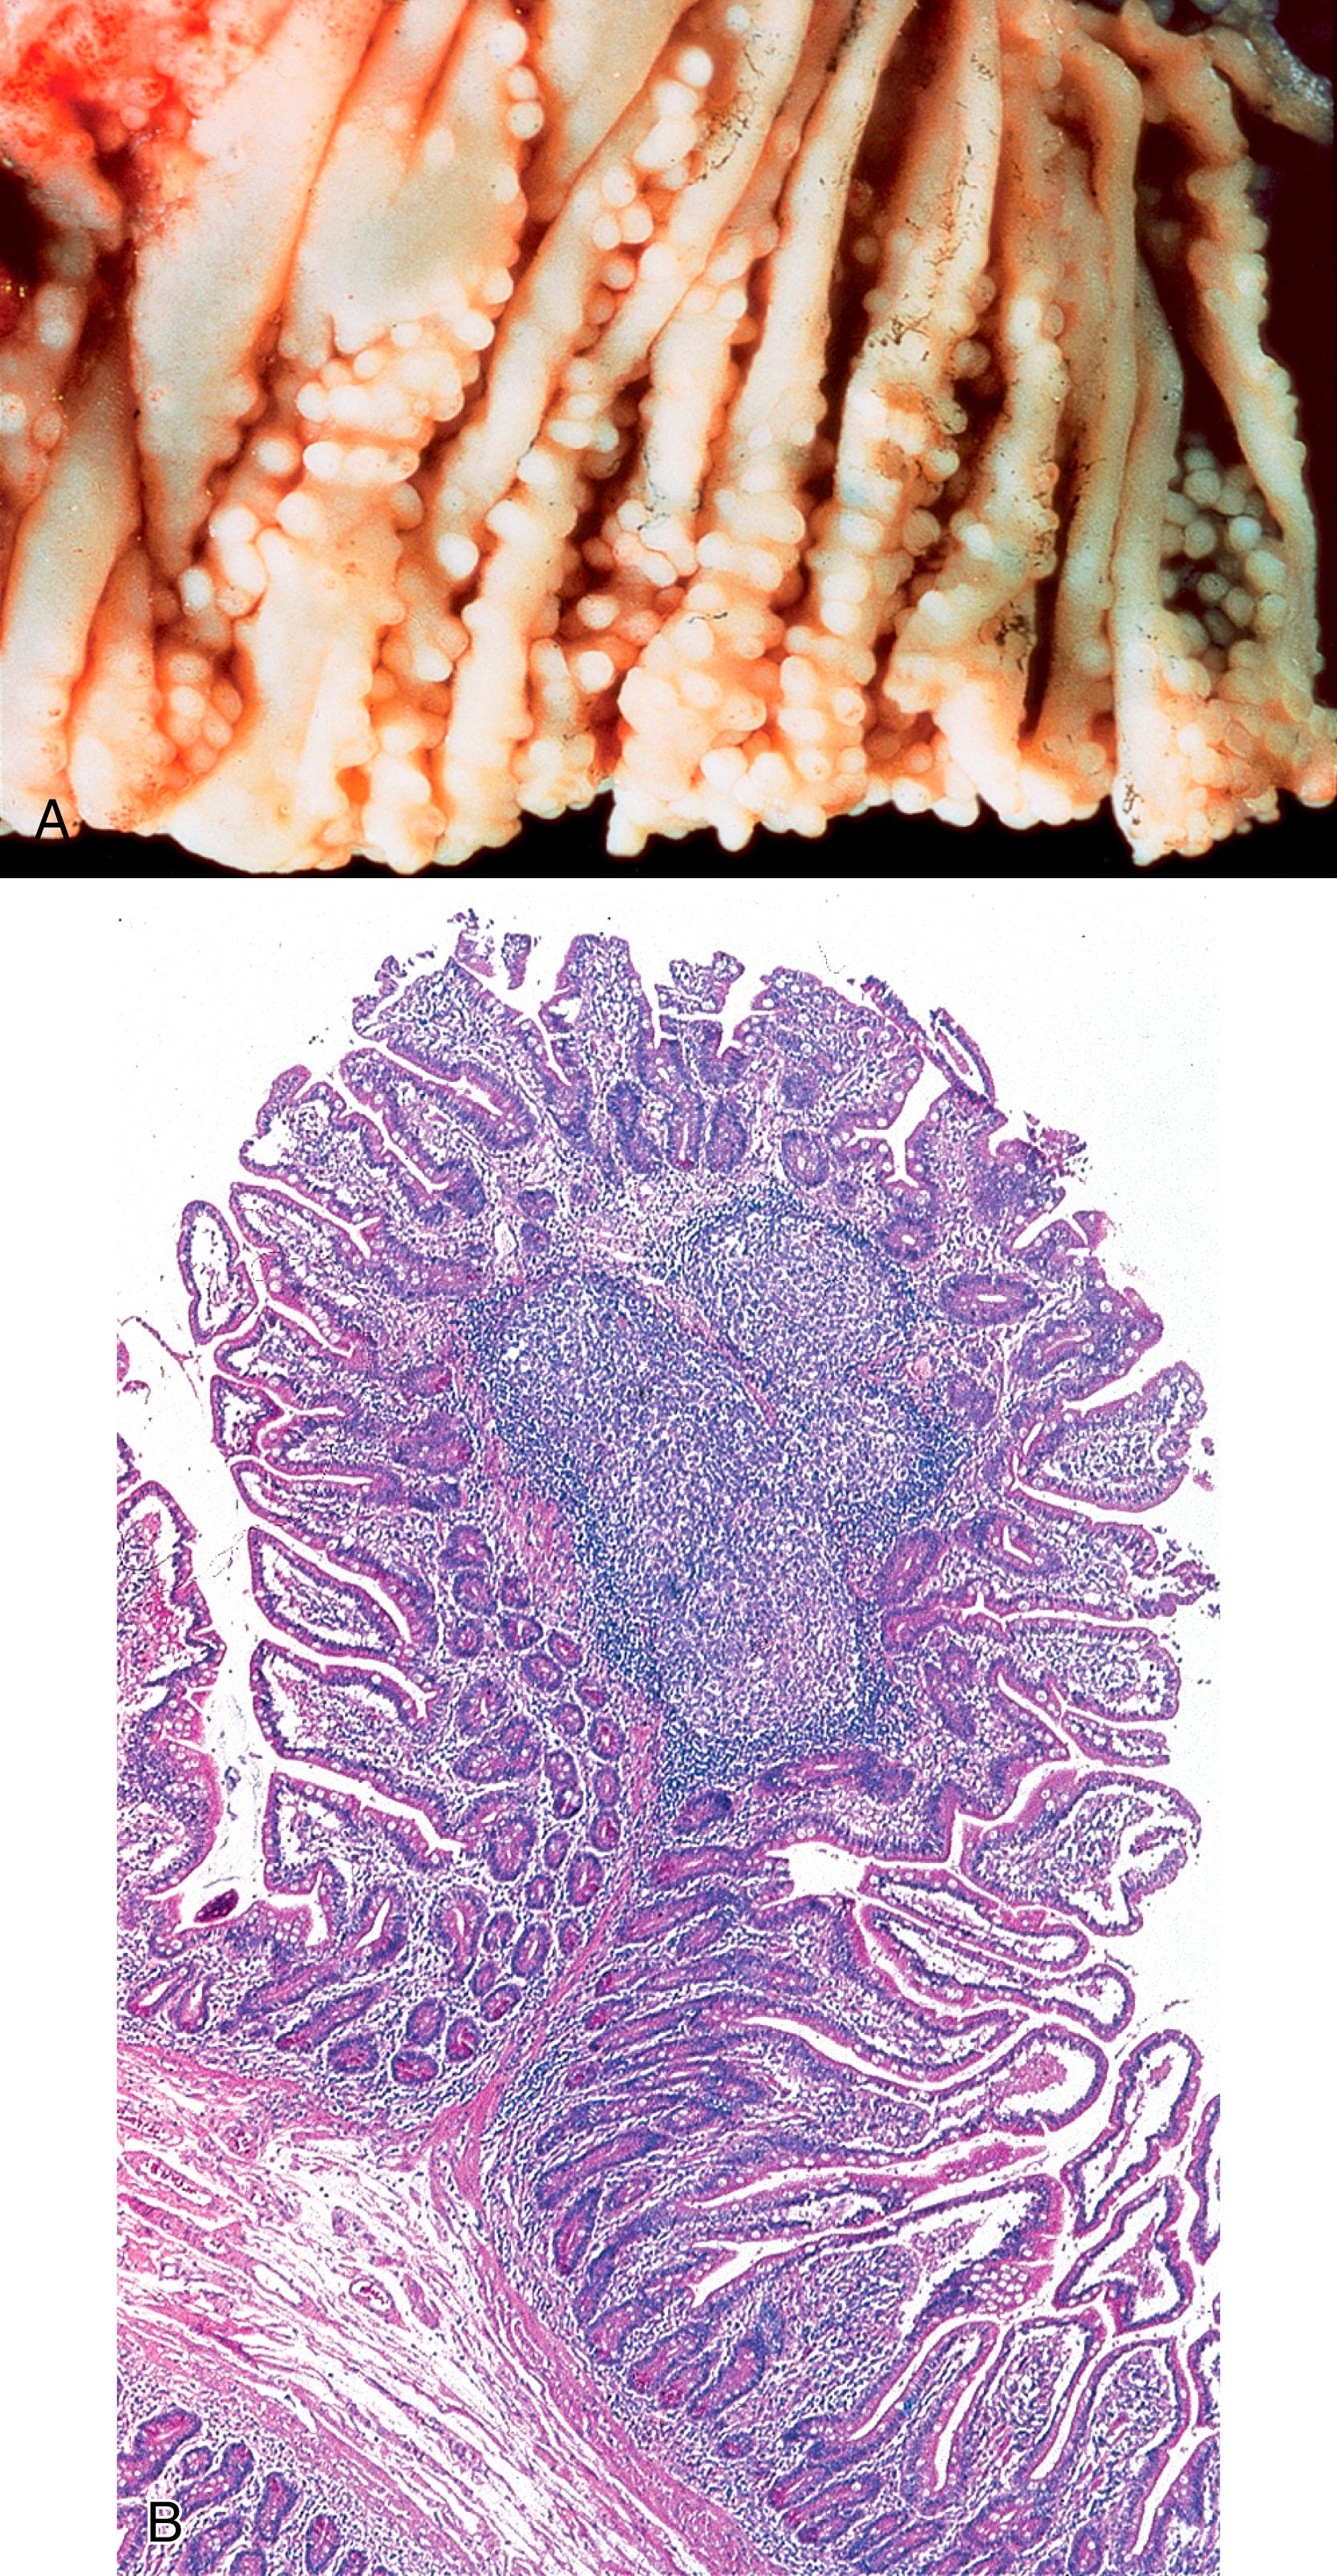 FIGURE 5.5, A, Nodular lymphoid hyperplasia in common variable immunodeficiency. Numerous small mucosal and submucosal nodules are present. B, Most of the lymphoid nodules contain enlarged germinal centers. Overlying villi are slightly distorted (H&E stain).